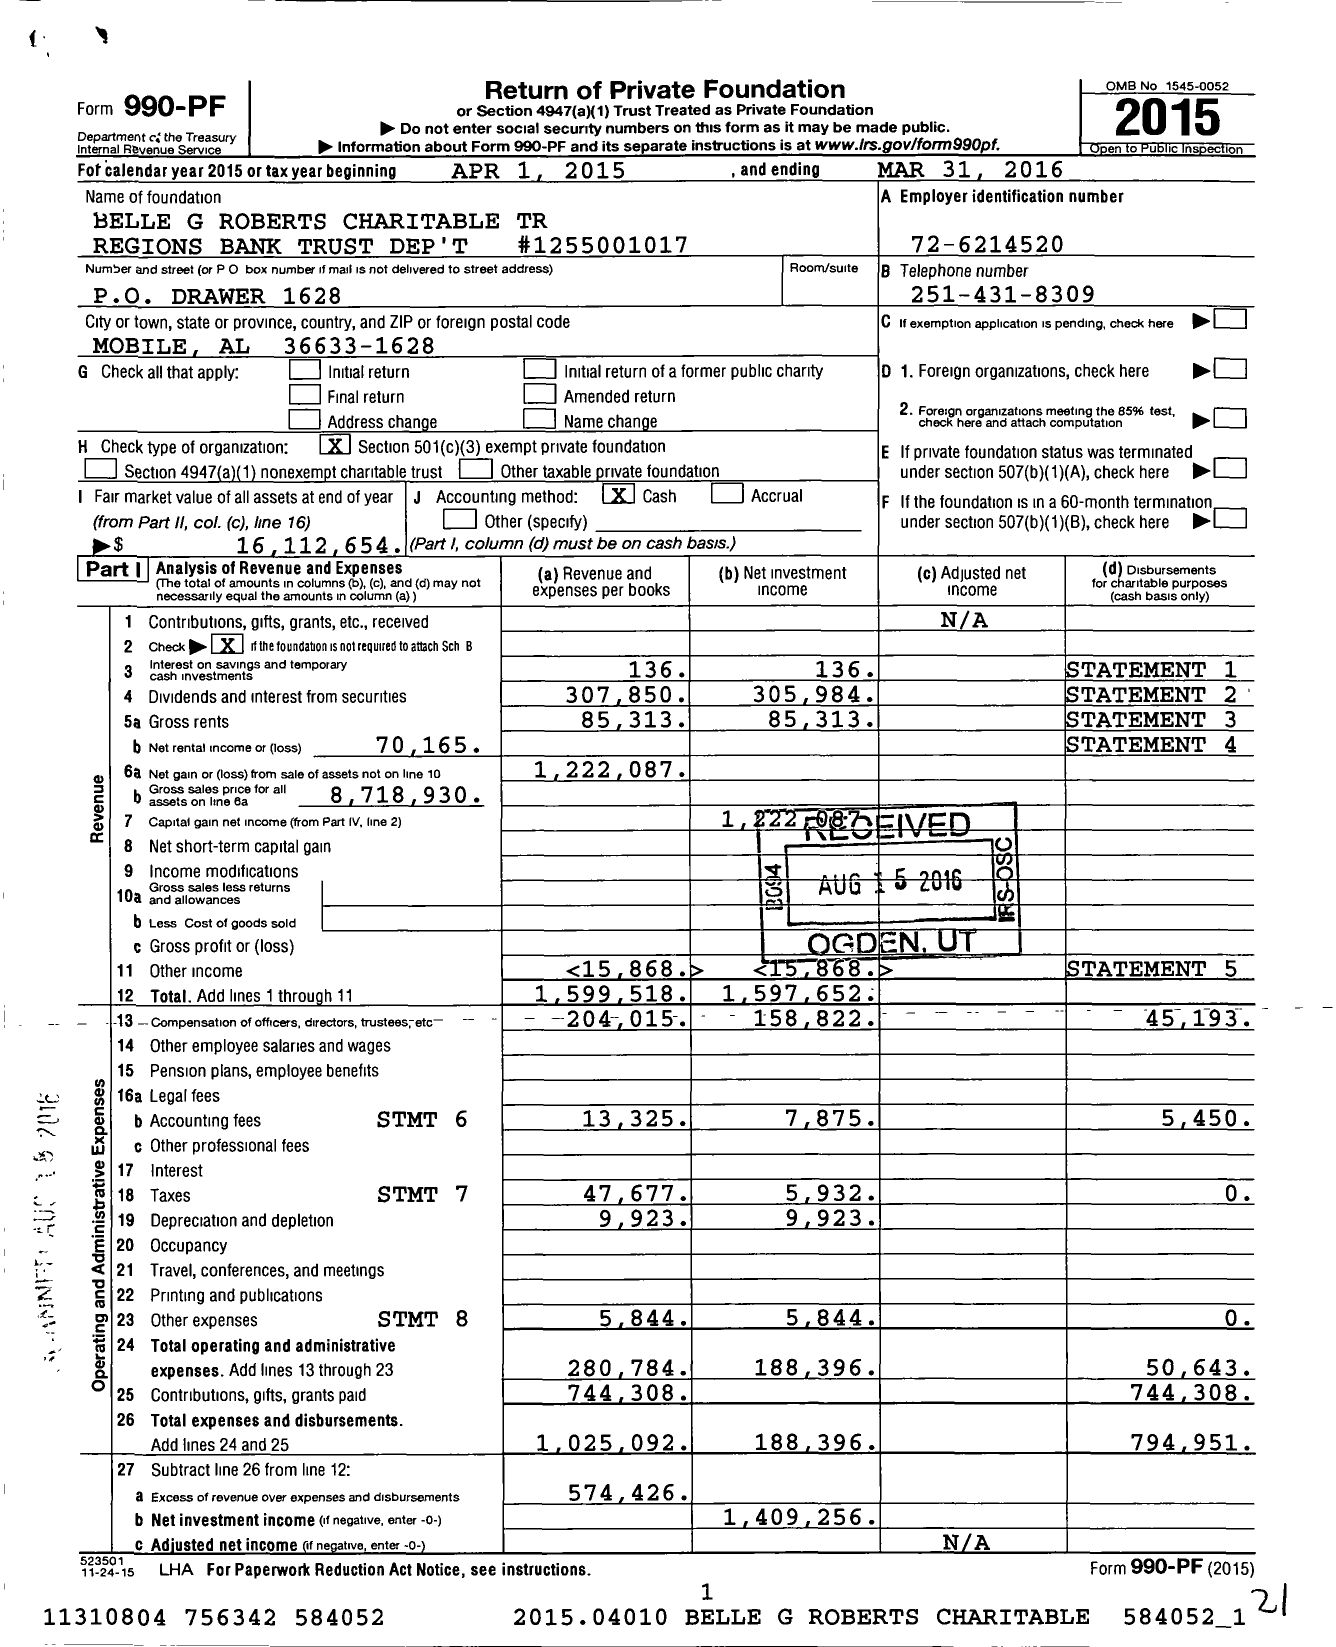 Image of first page of 2015 Form 990PF for Belle G Roberts Charitable TR Regions Bank Trust Dep't #1255001017